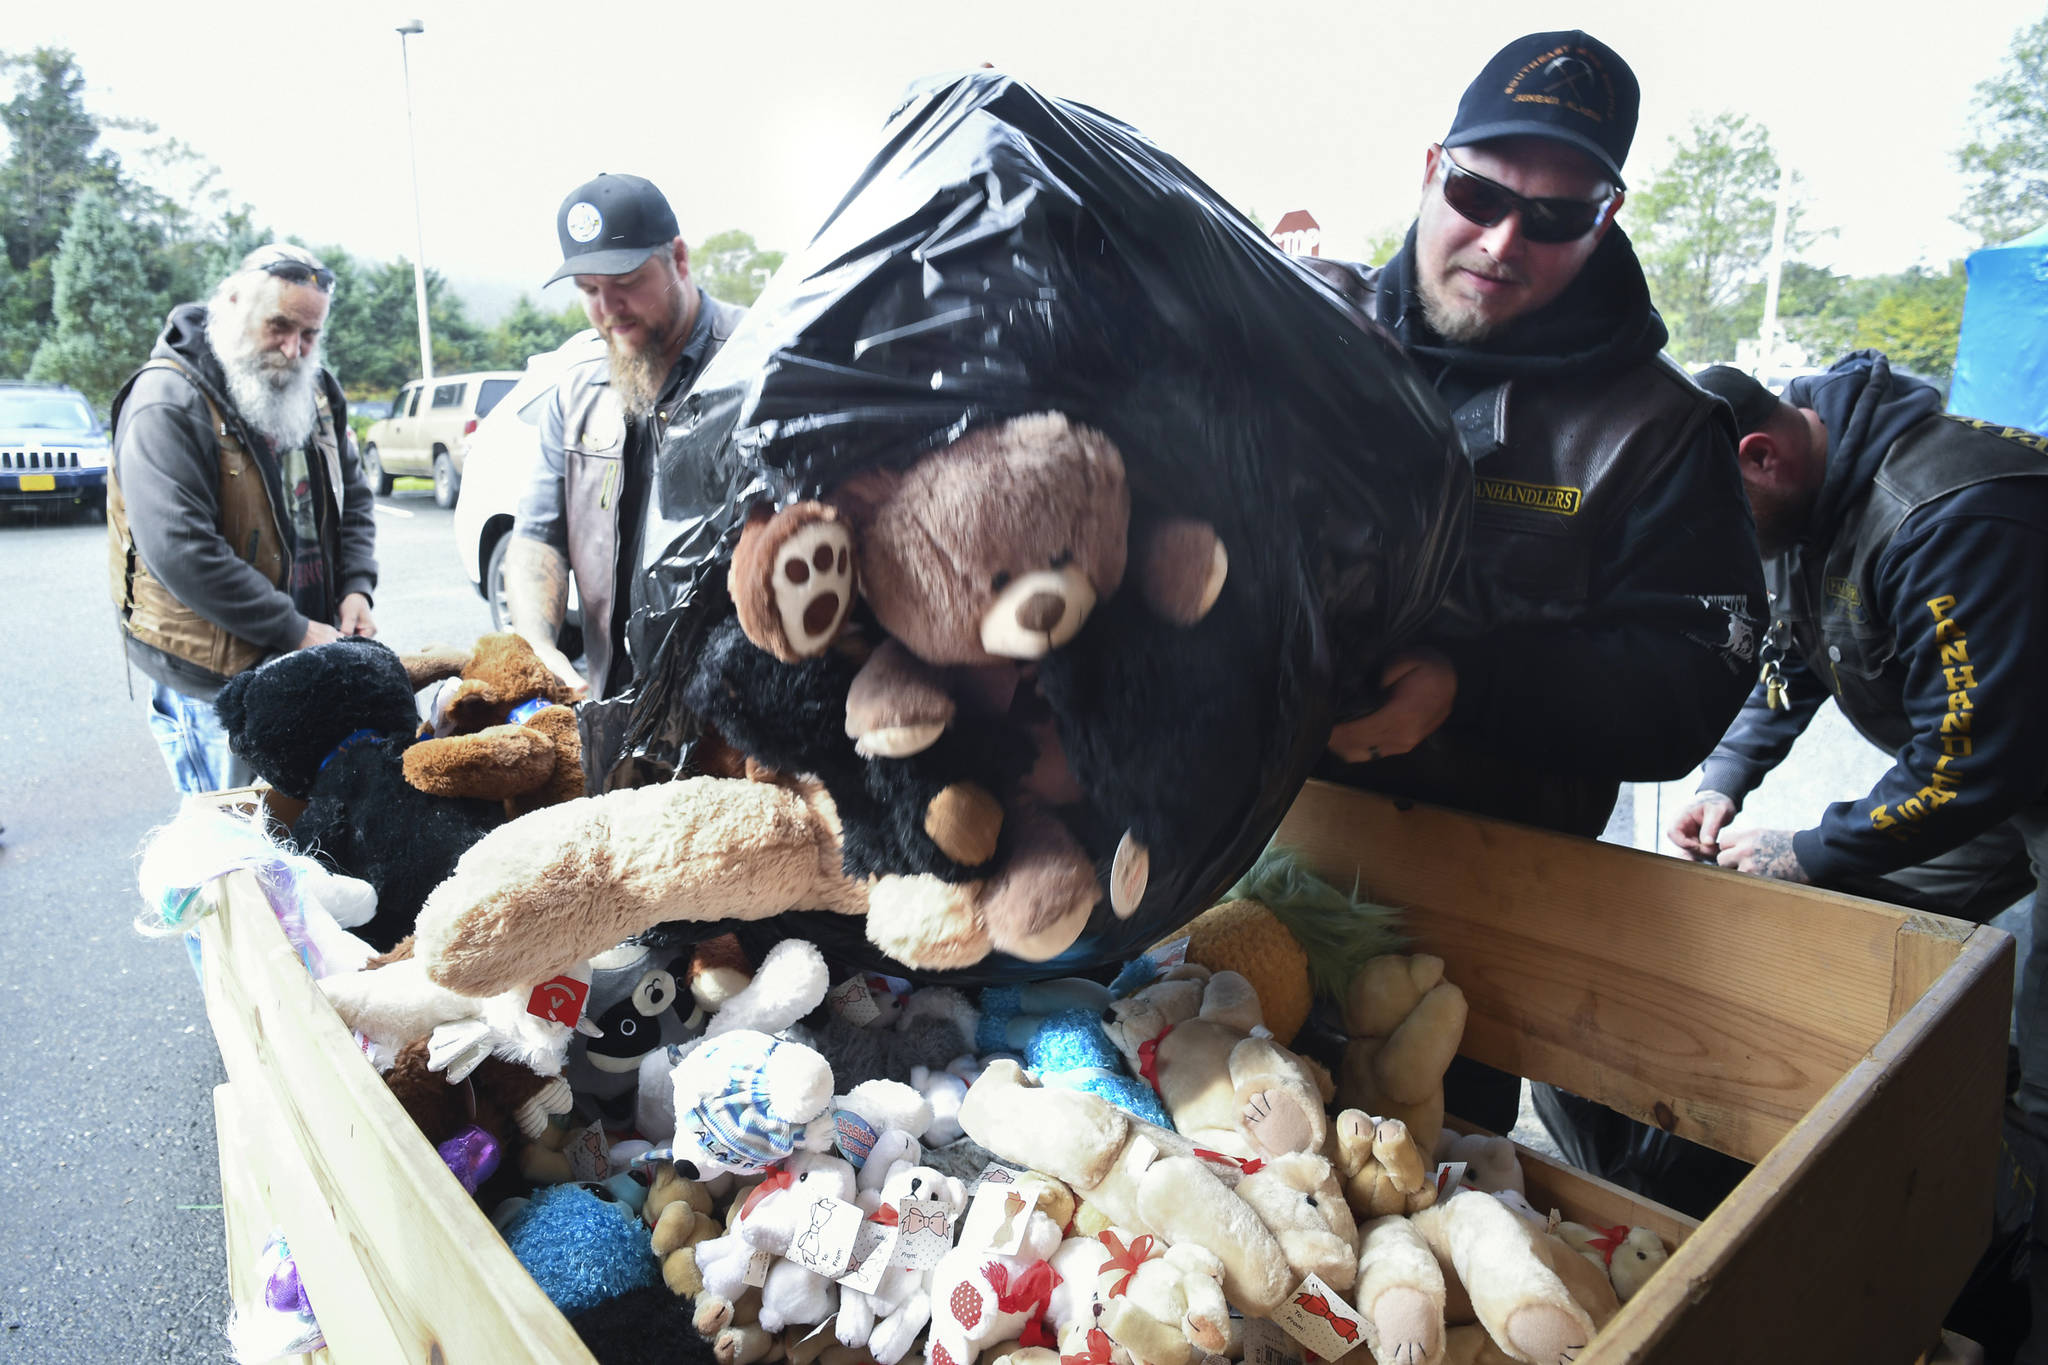 Joe Bingham, right, unloads a bag of stuffed toys with other members of the Panhandlers Motorcycle Club of Alaska at Bartlett Regional Hospital on Tuesday. The toys were collected during the 25th Annual Toy Run for young patients and visitors to the hospital.                                <strong>Michael Penn</strong> | Juneau Empire